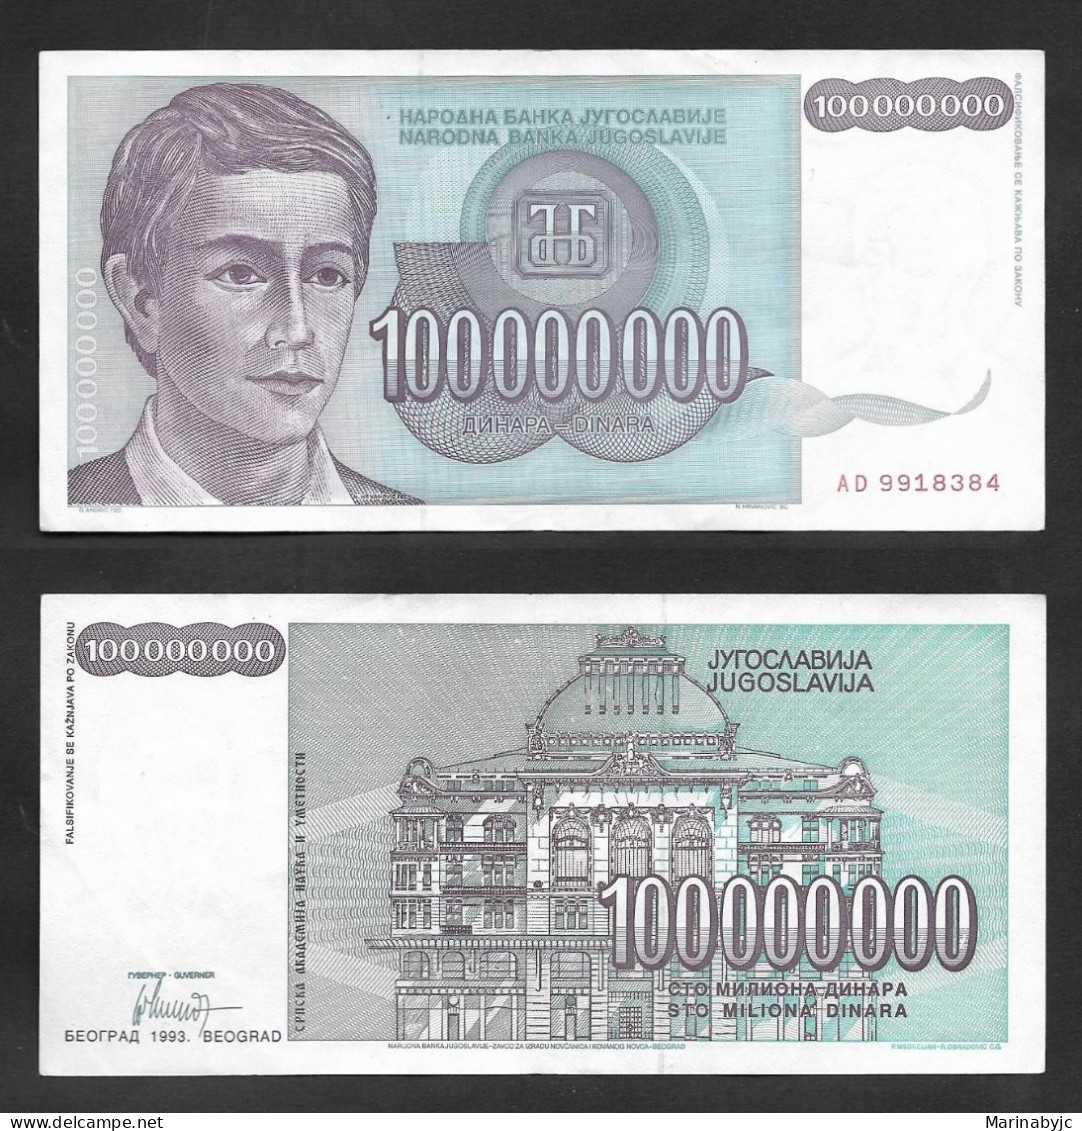 SE)1992 YUGOSLAVIA, BANKNOTE OF 100,000,000 DINARS OF THE CENTRAL BANK OF YUGOSLAVIA, WITH REVERSE, VF - Gebraucht